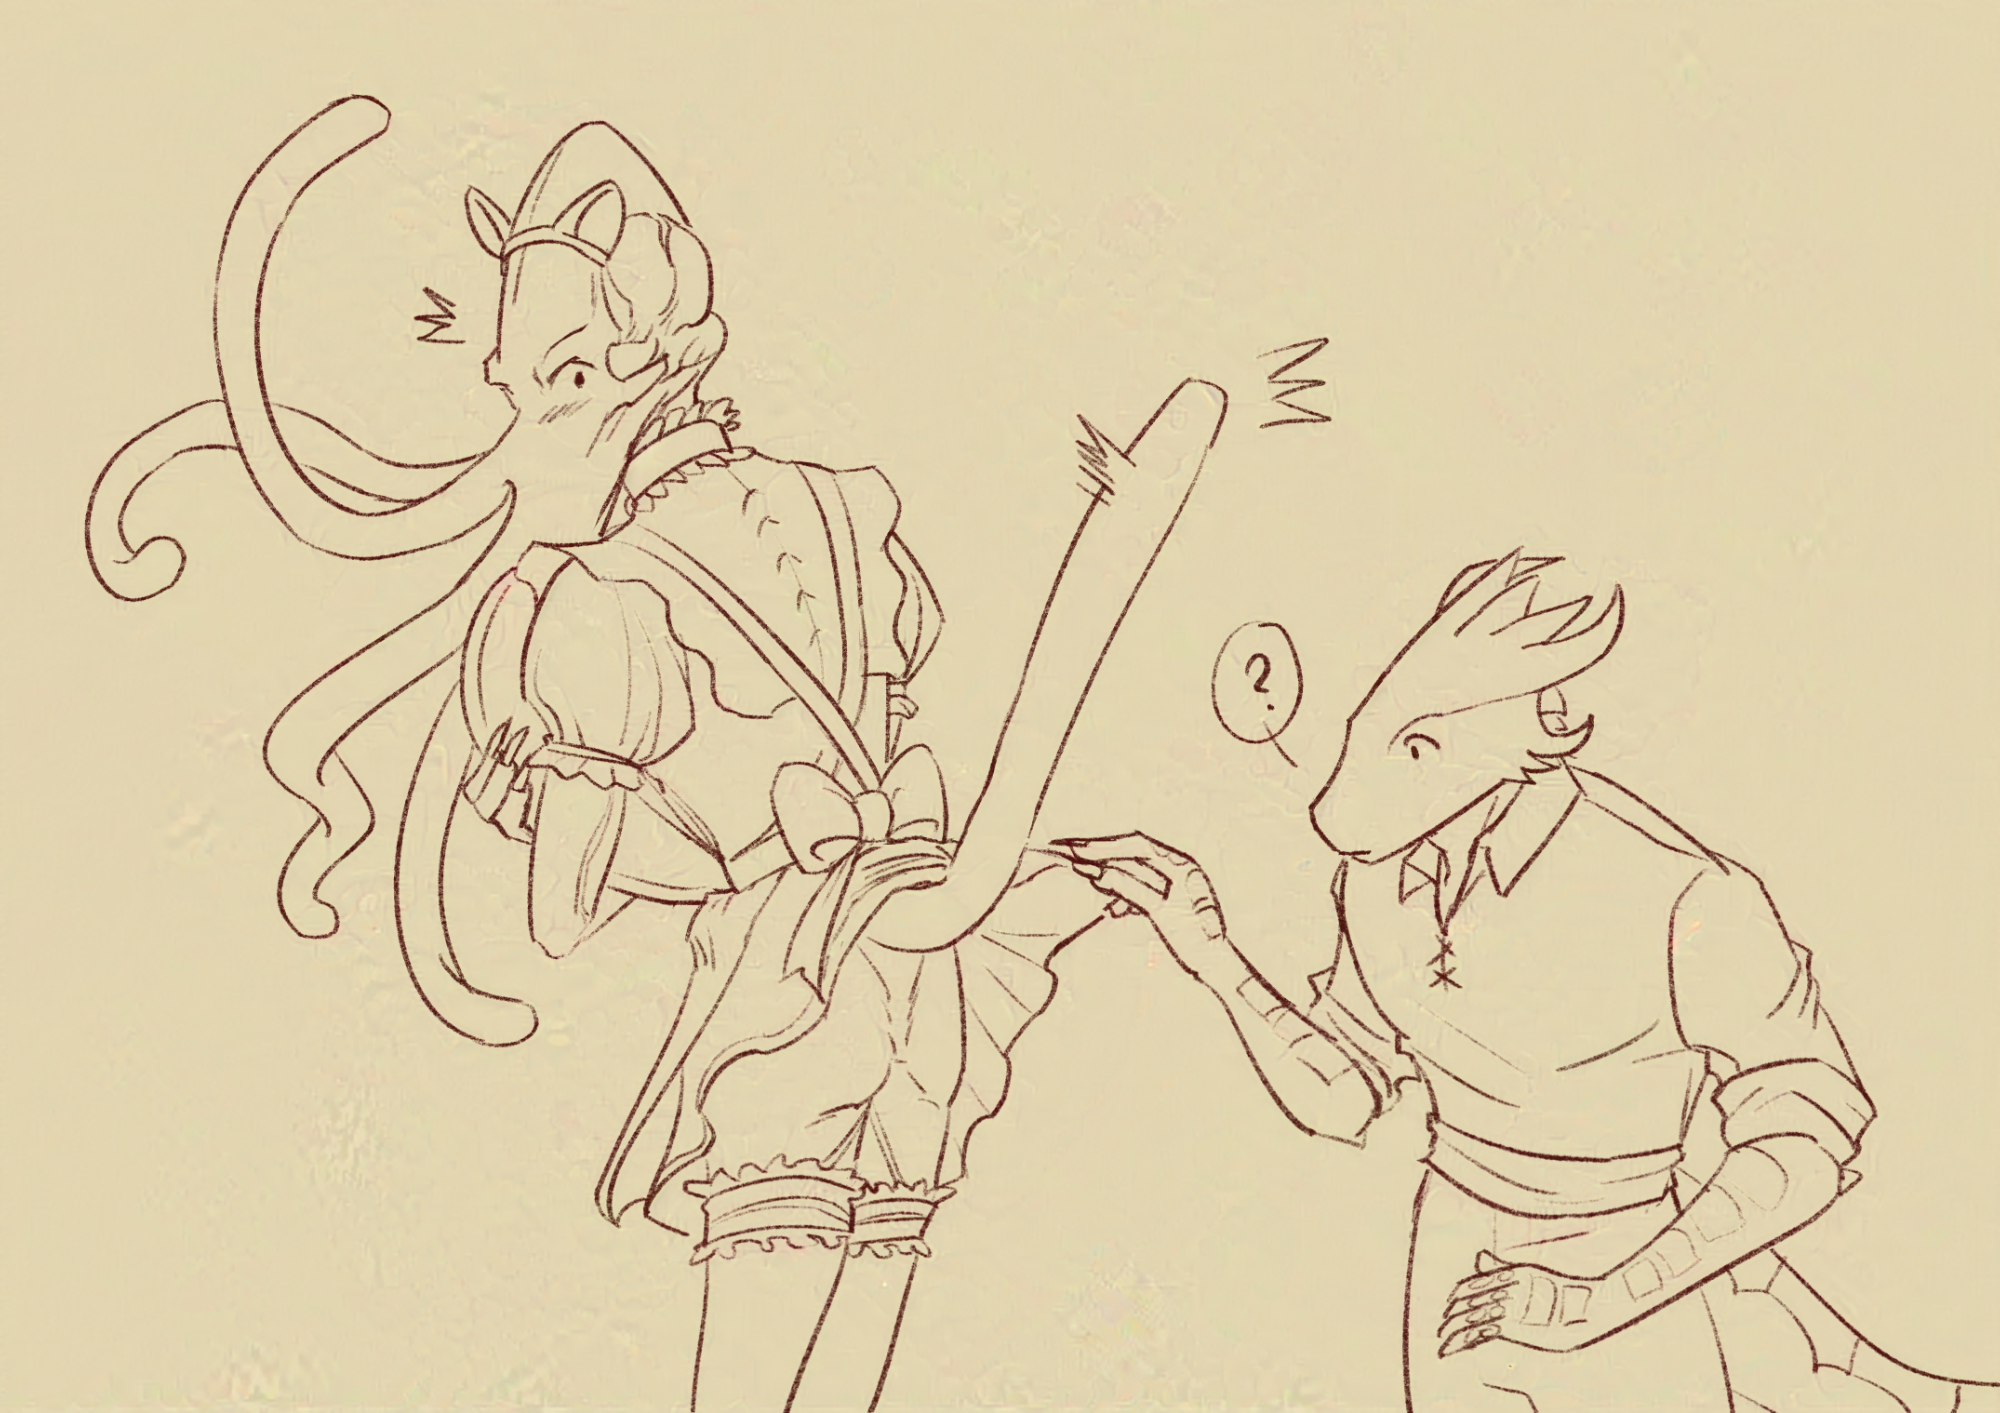 The Emperor is dressed up as a cat maid, in a very cute frilly maid outfit with cat ears. Daamric is lifting the back of the Emperor's skirt in confusion at the Emperor's tentacle cat tail. The Emperor looks back in shock.